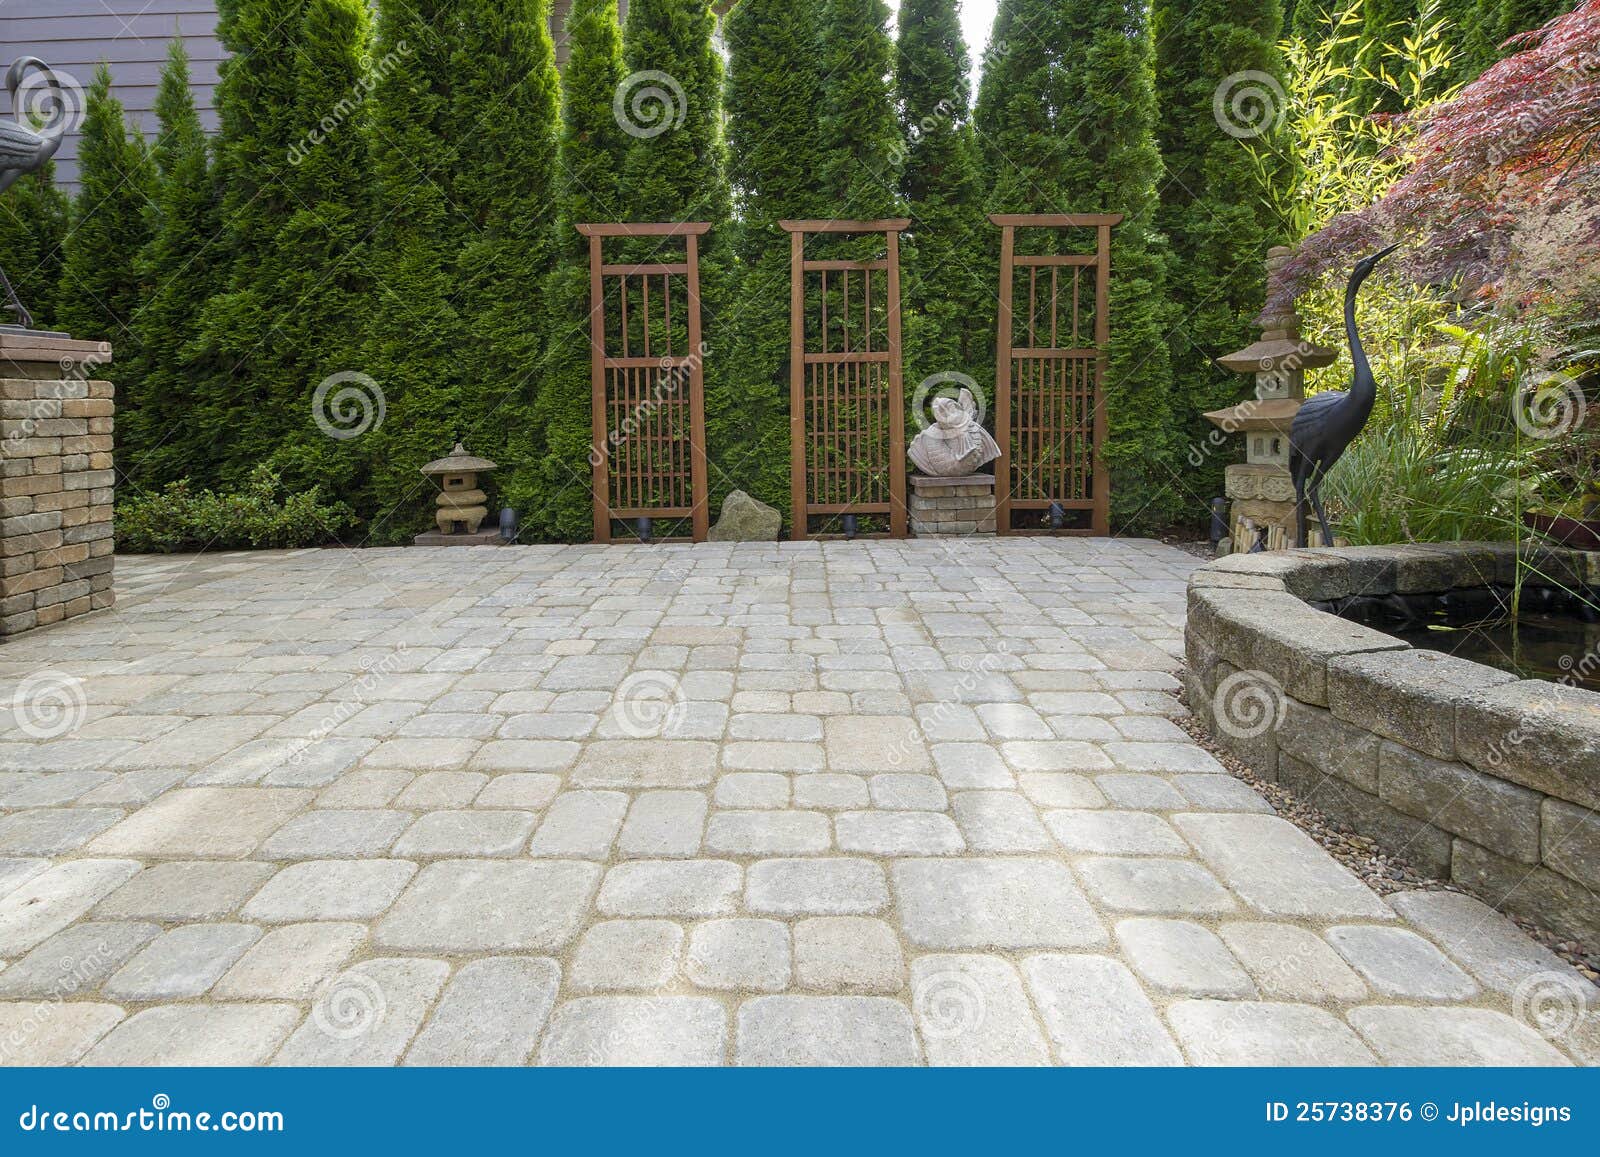 backyard paver patio with pond in garden